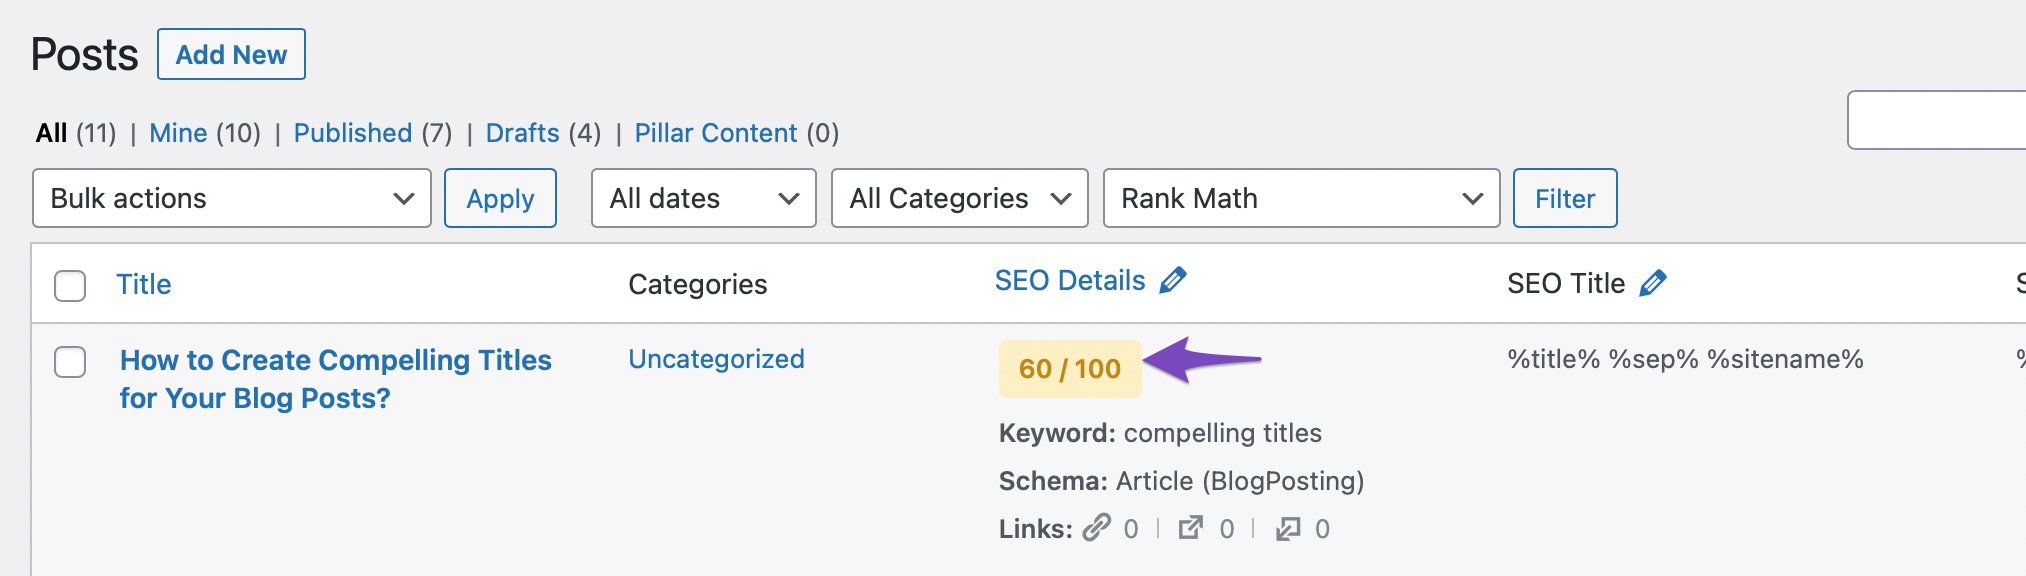 Updated SEO score on the post list view